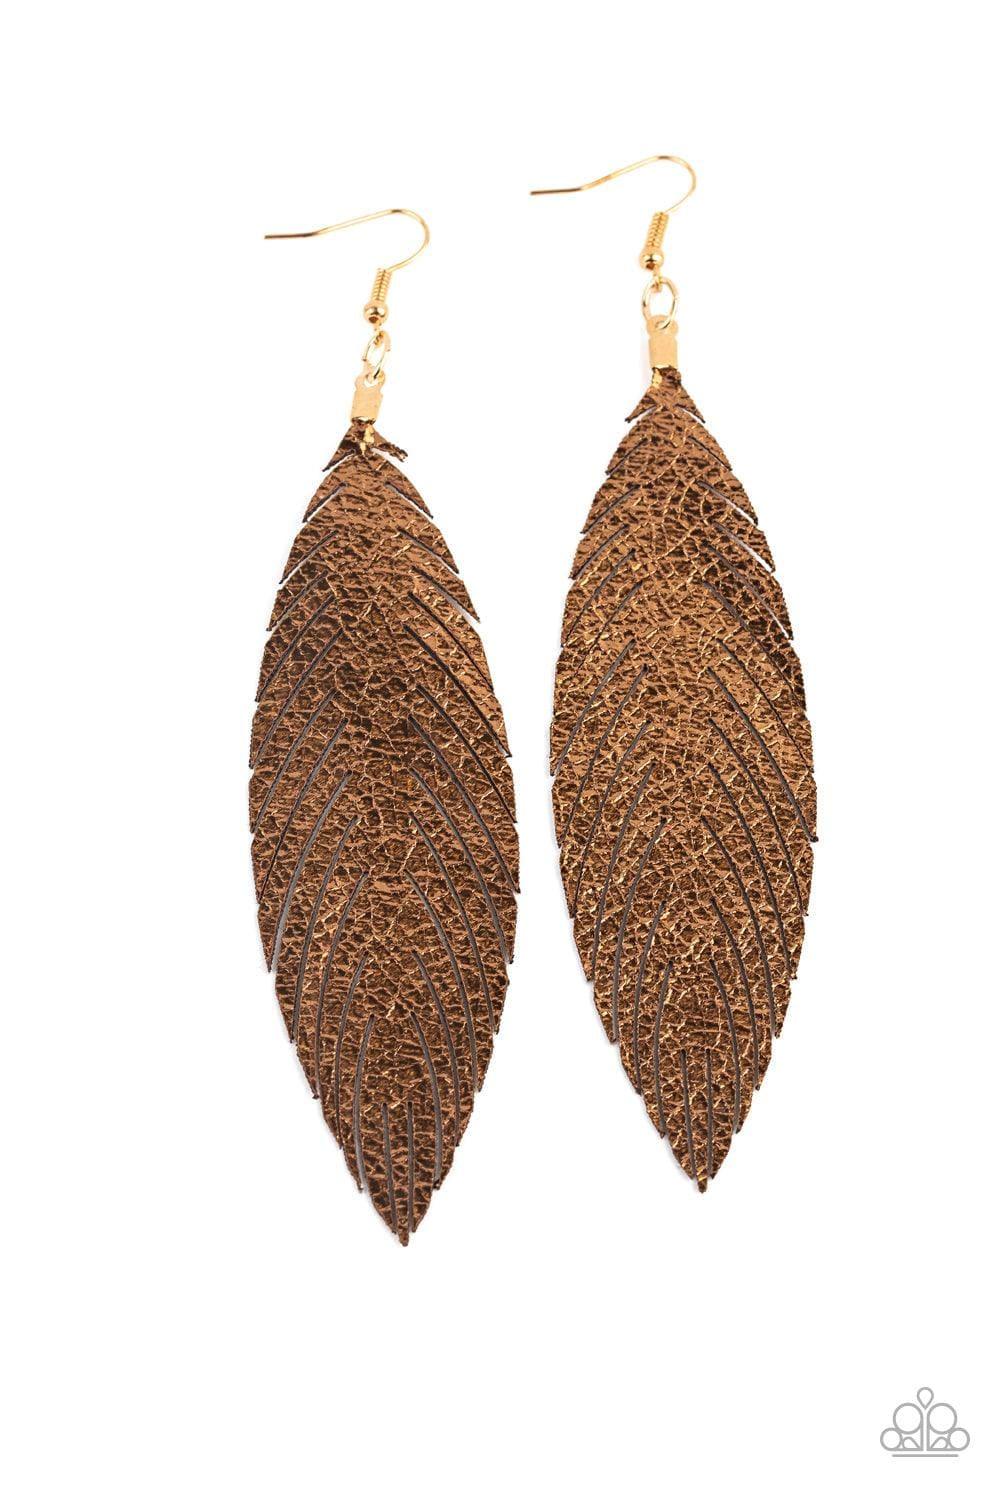 Paparazzi Accessories - Feather Fantasy - Gold Earrings - Bling by JessieK